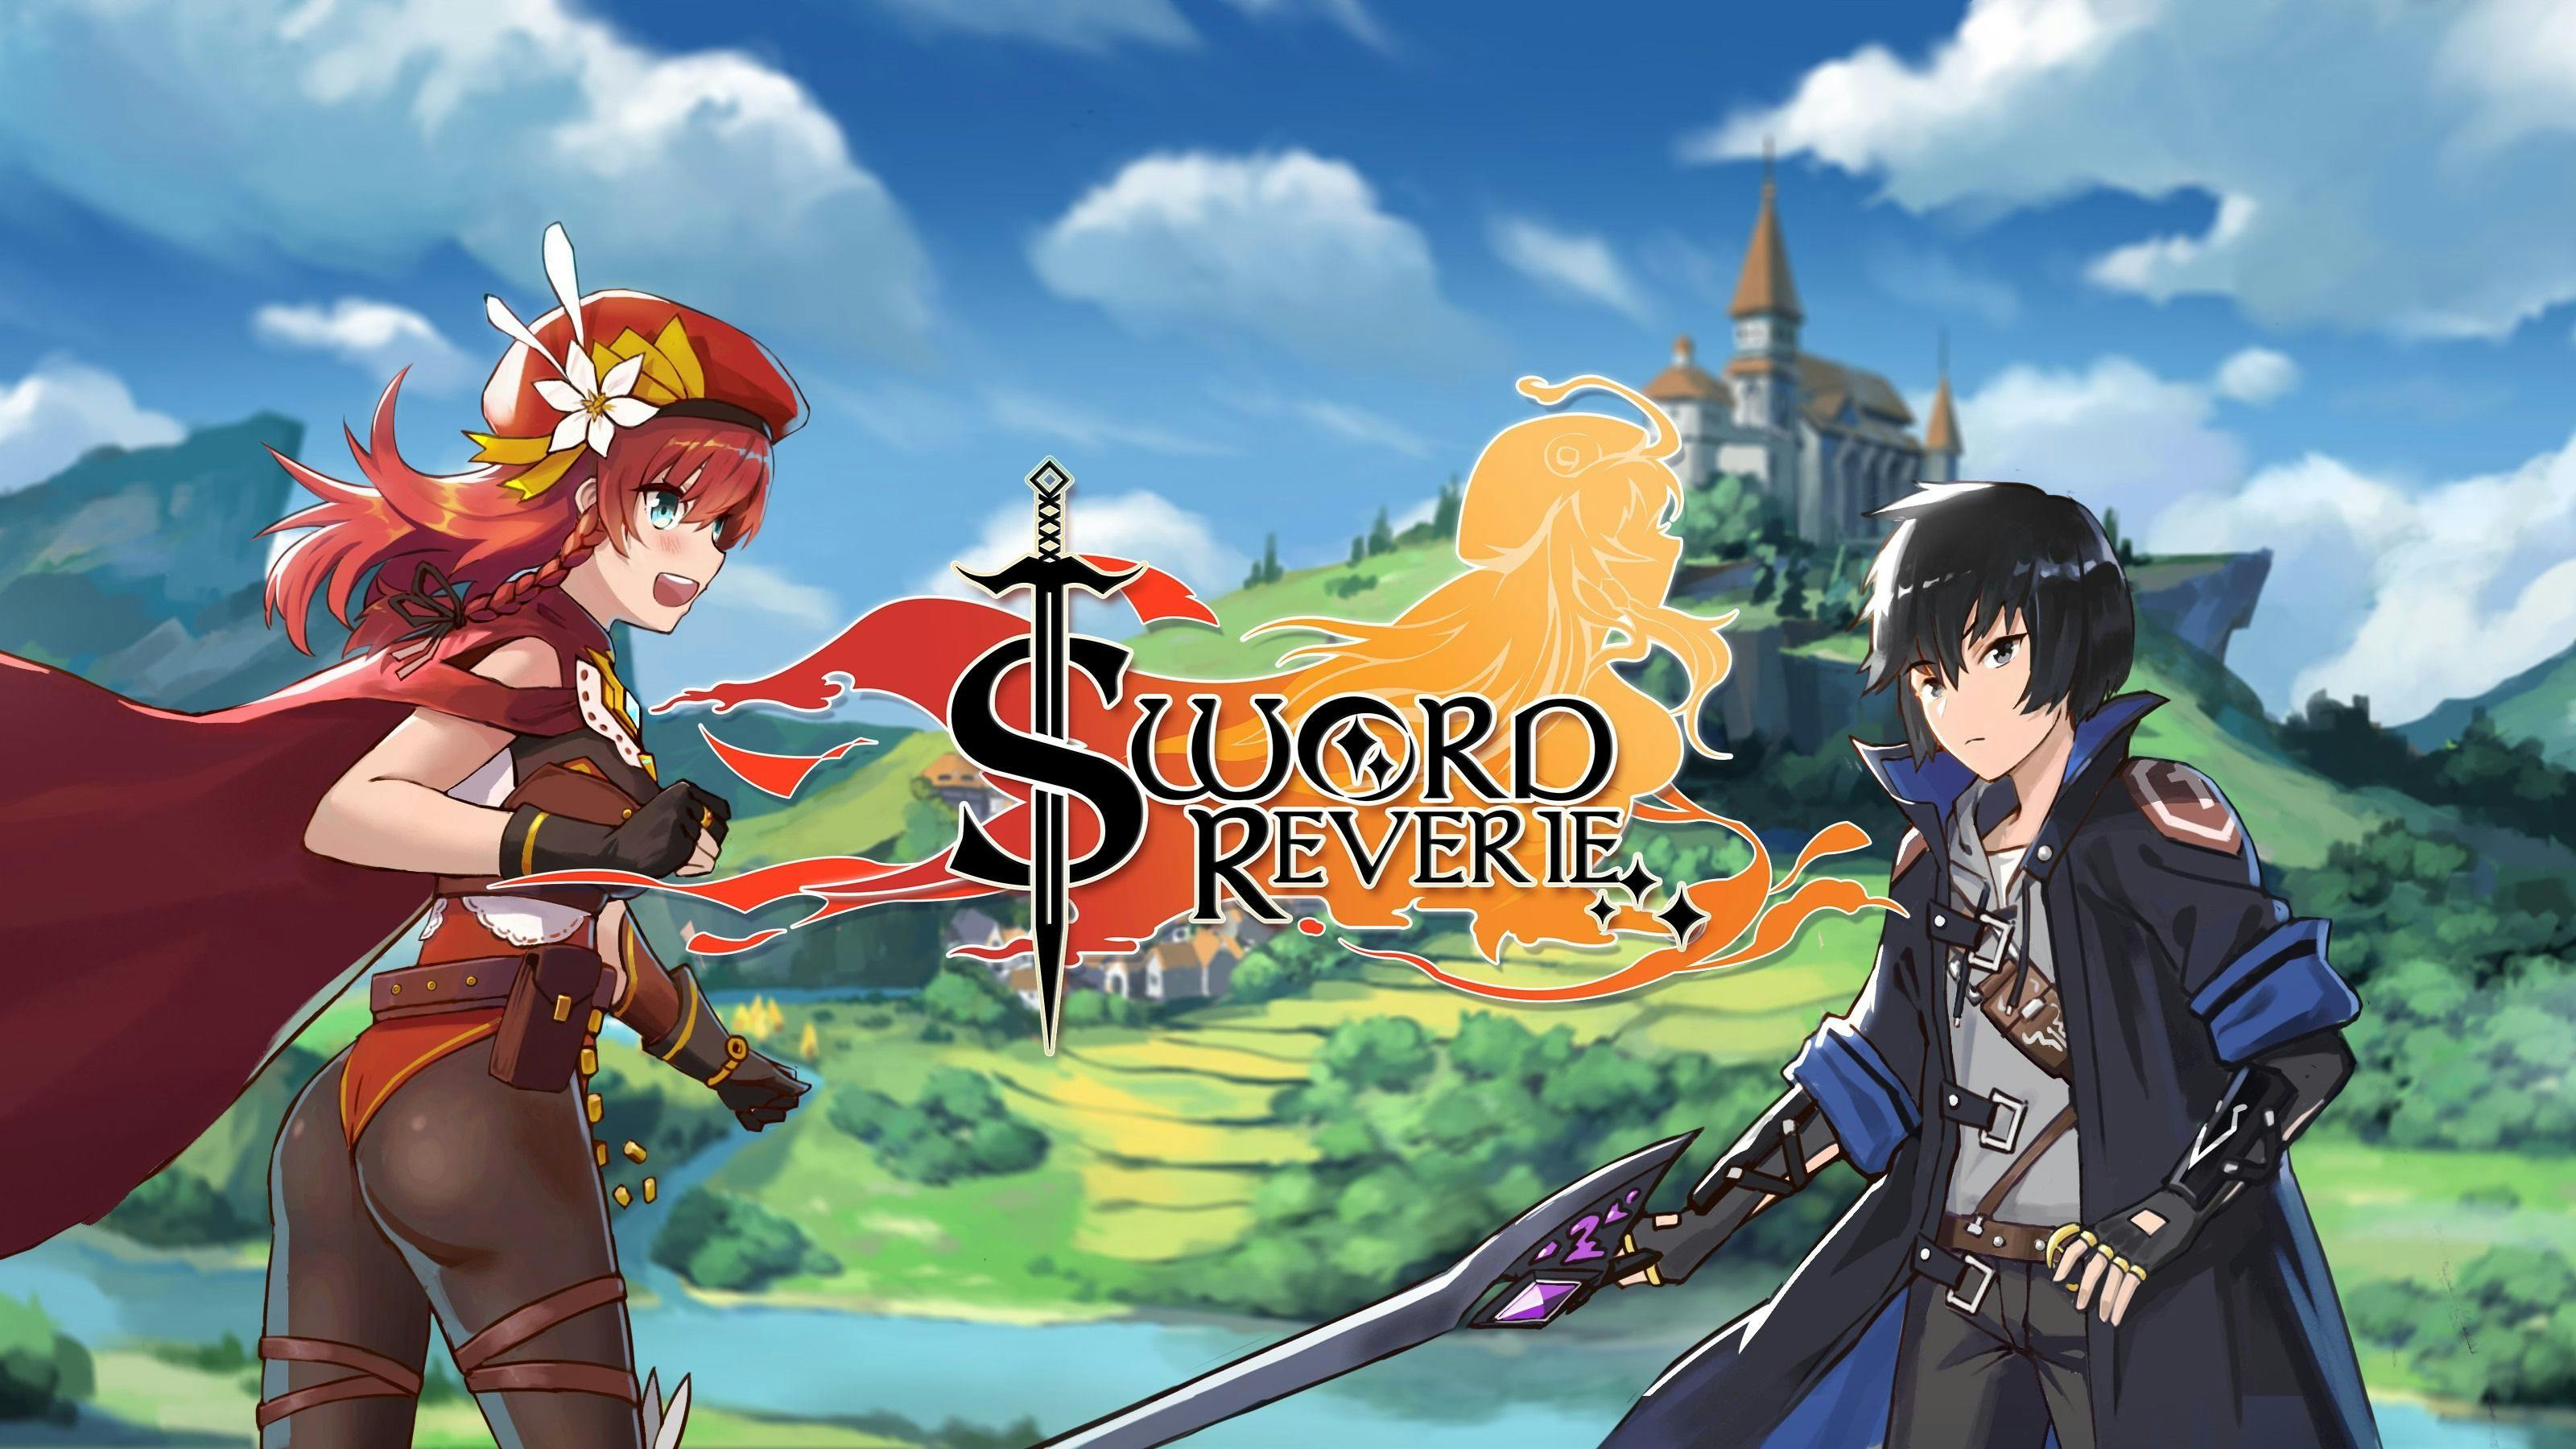 featured image - Sword Reverie is a Bright Beginning for VR JRPGs